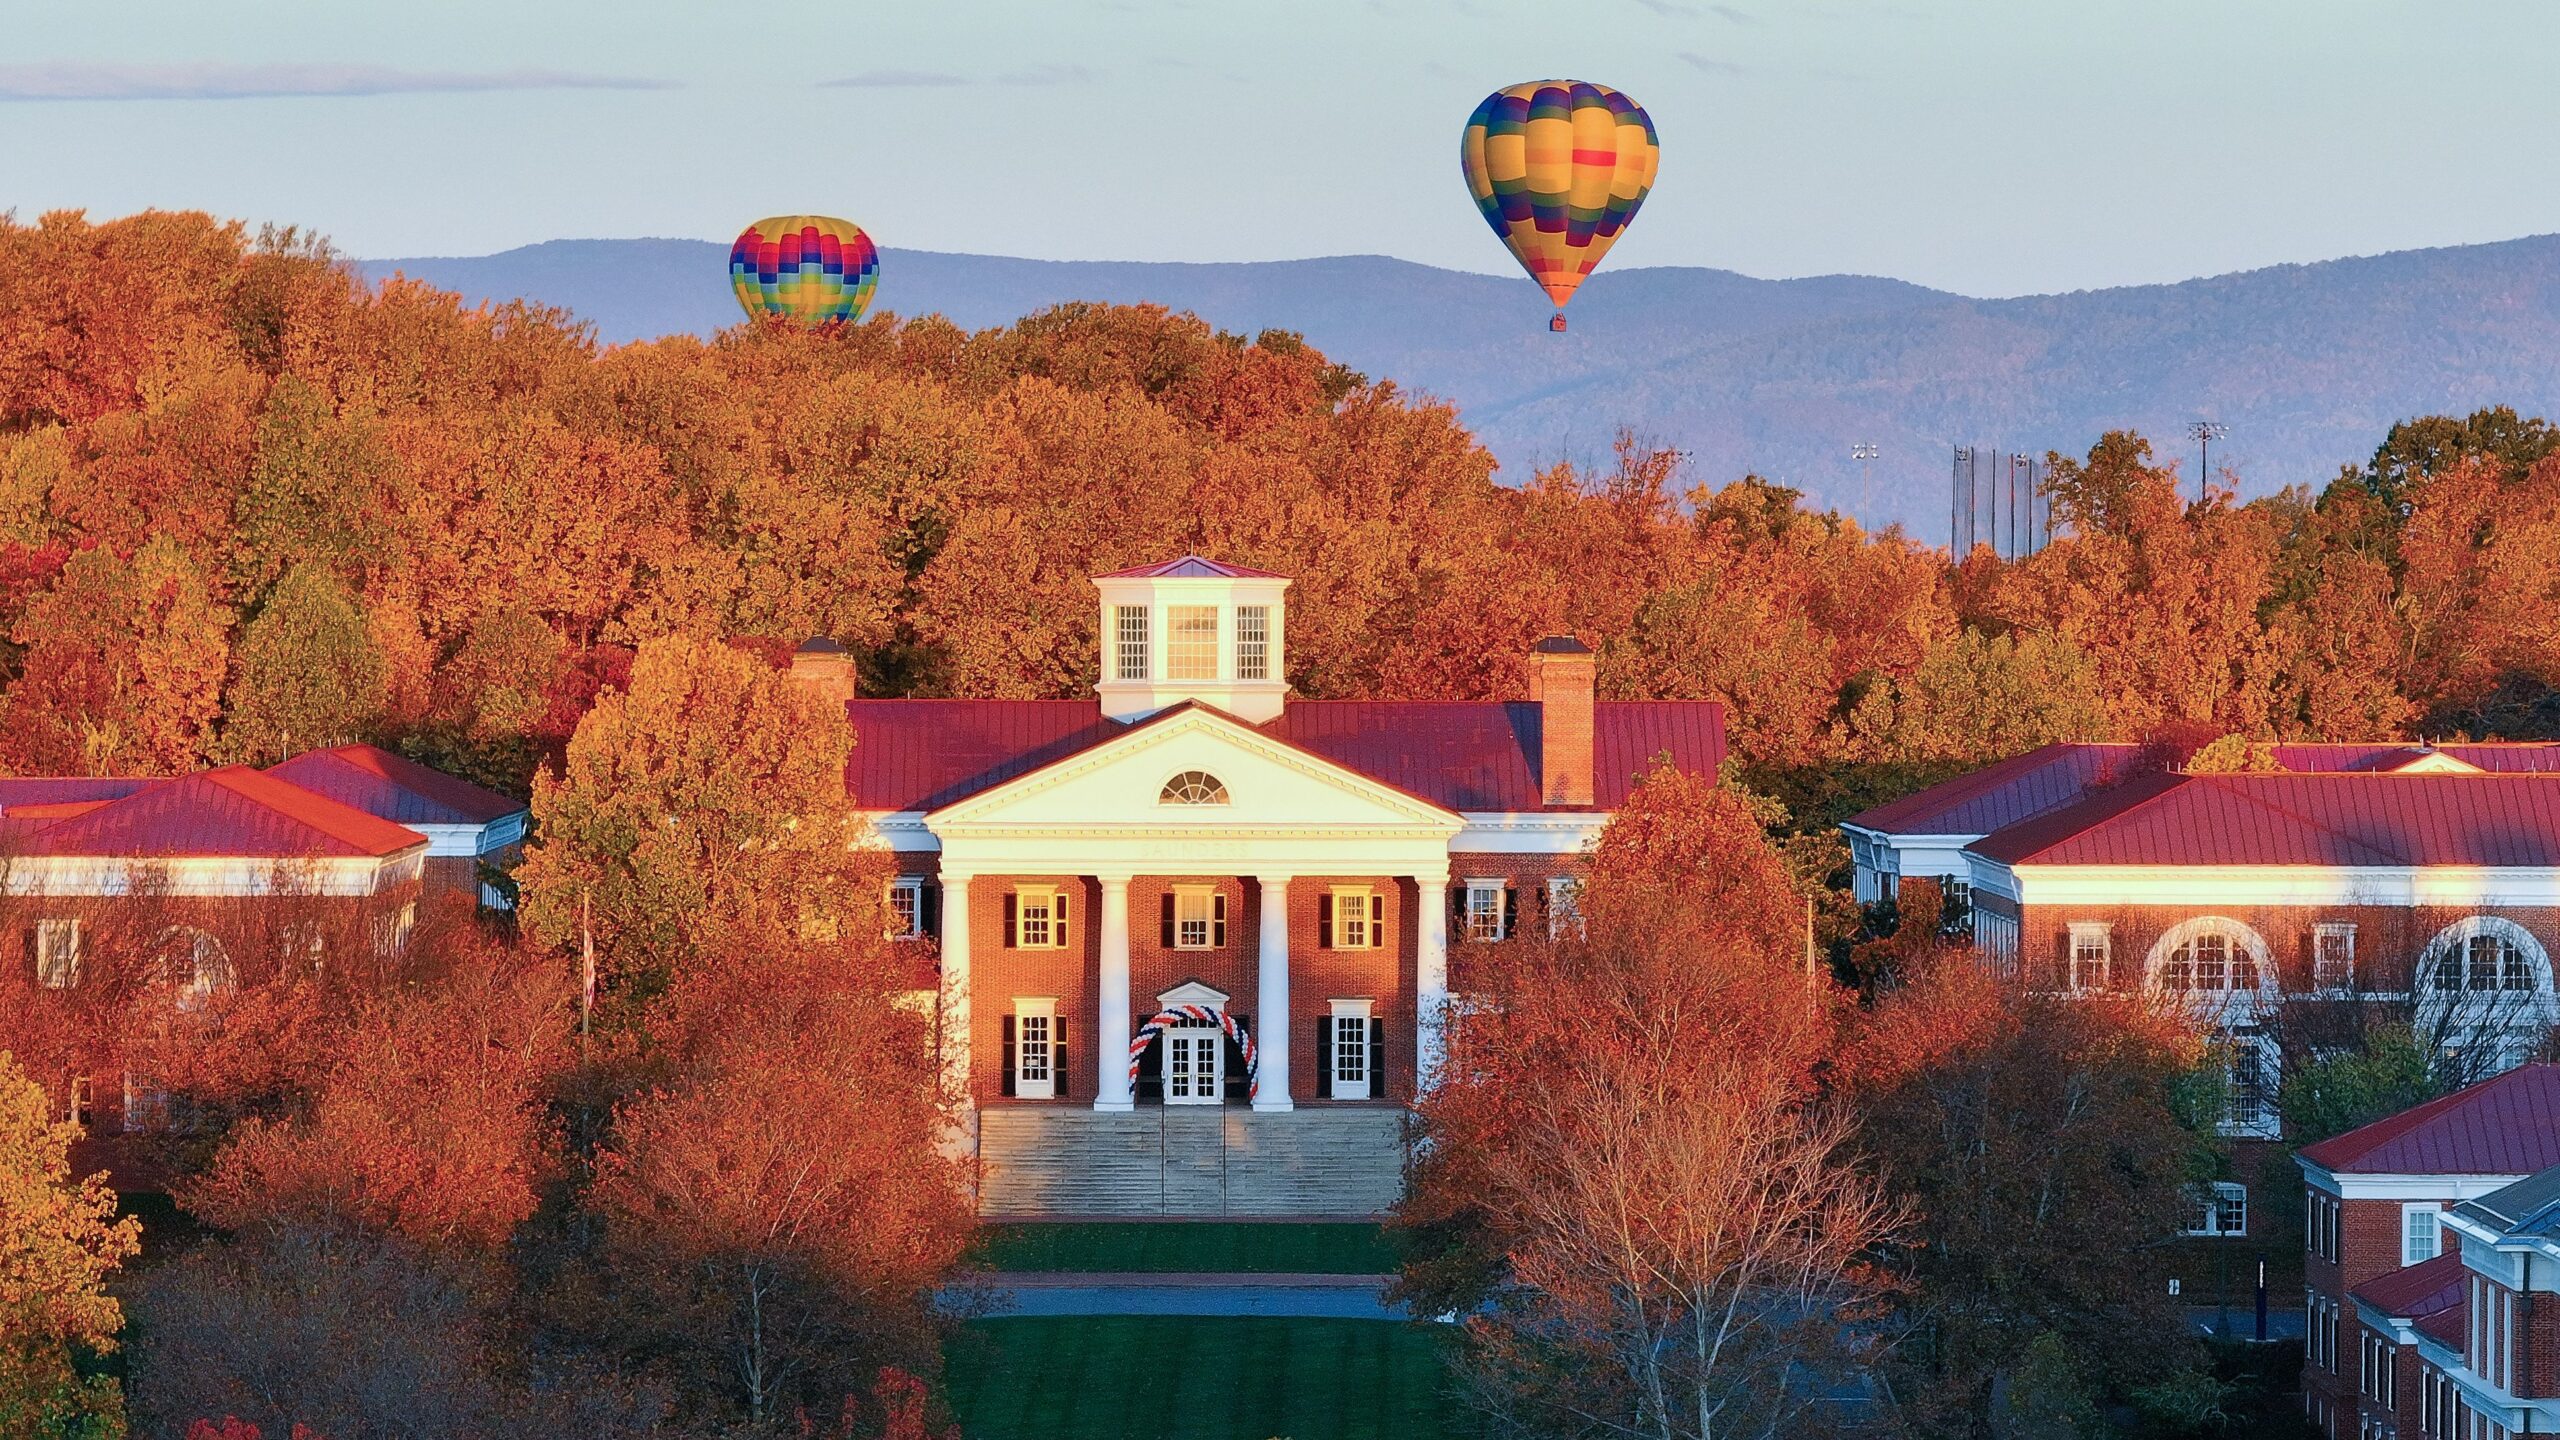 Aerial photo of Darden Grounds in the fall, with orange foliage and hot air balloons in the background.